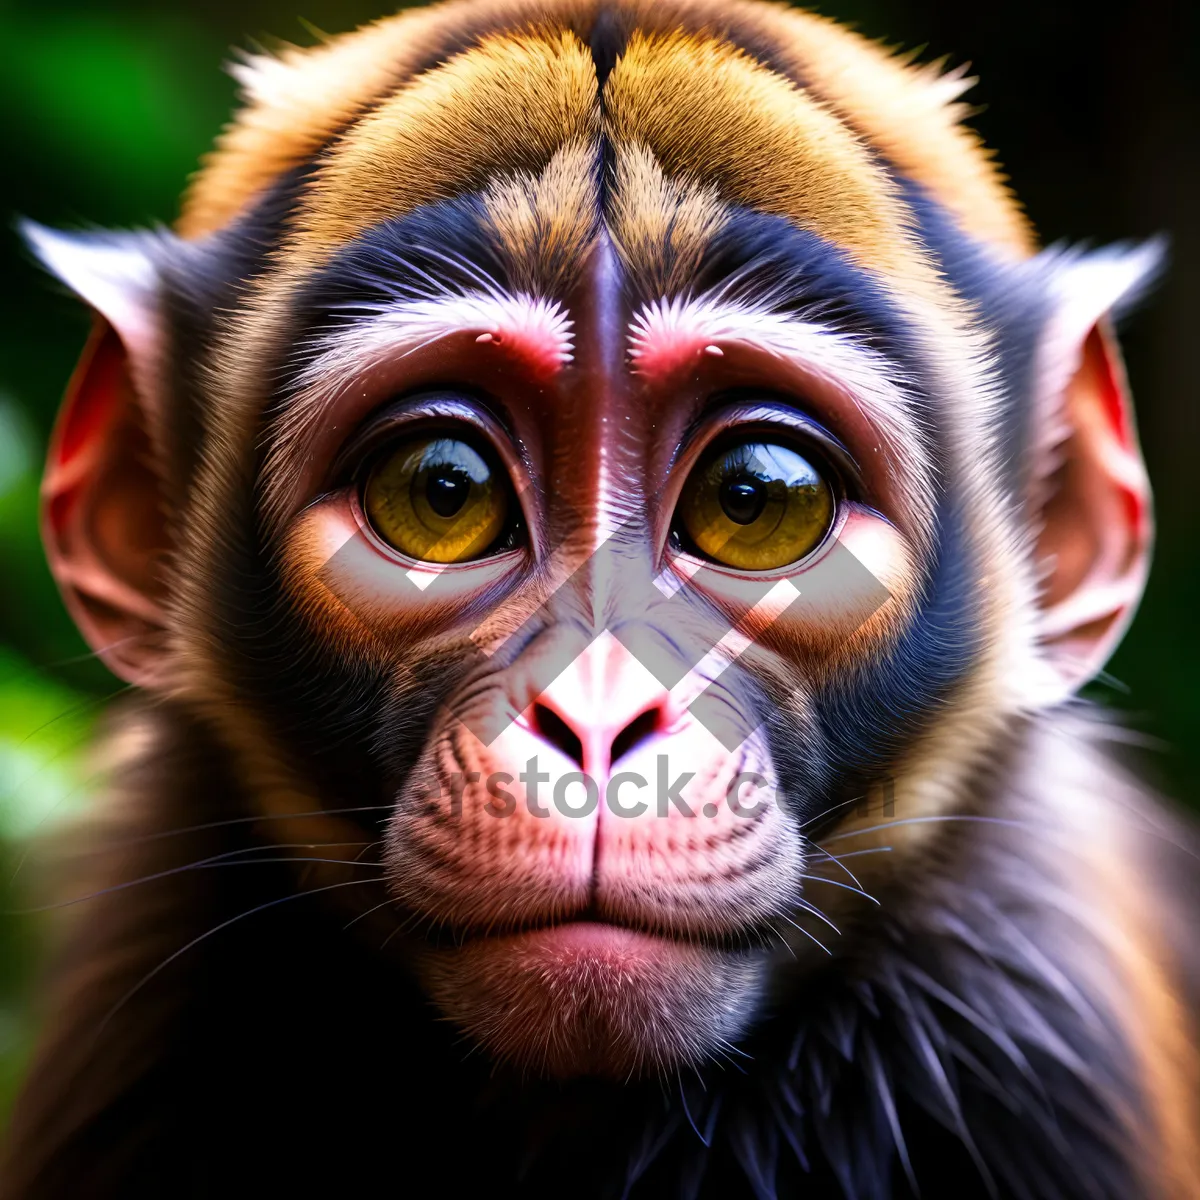 Picture of Cute Chimp Kitty with Whiskers and Piercing Eyes